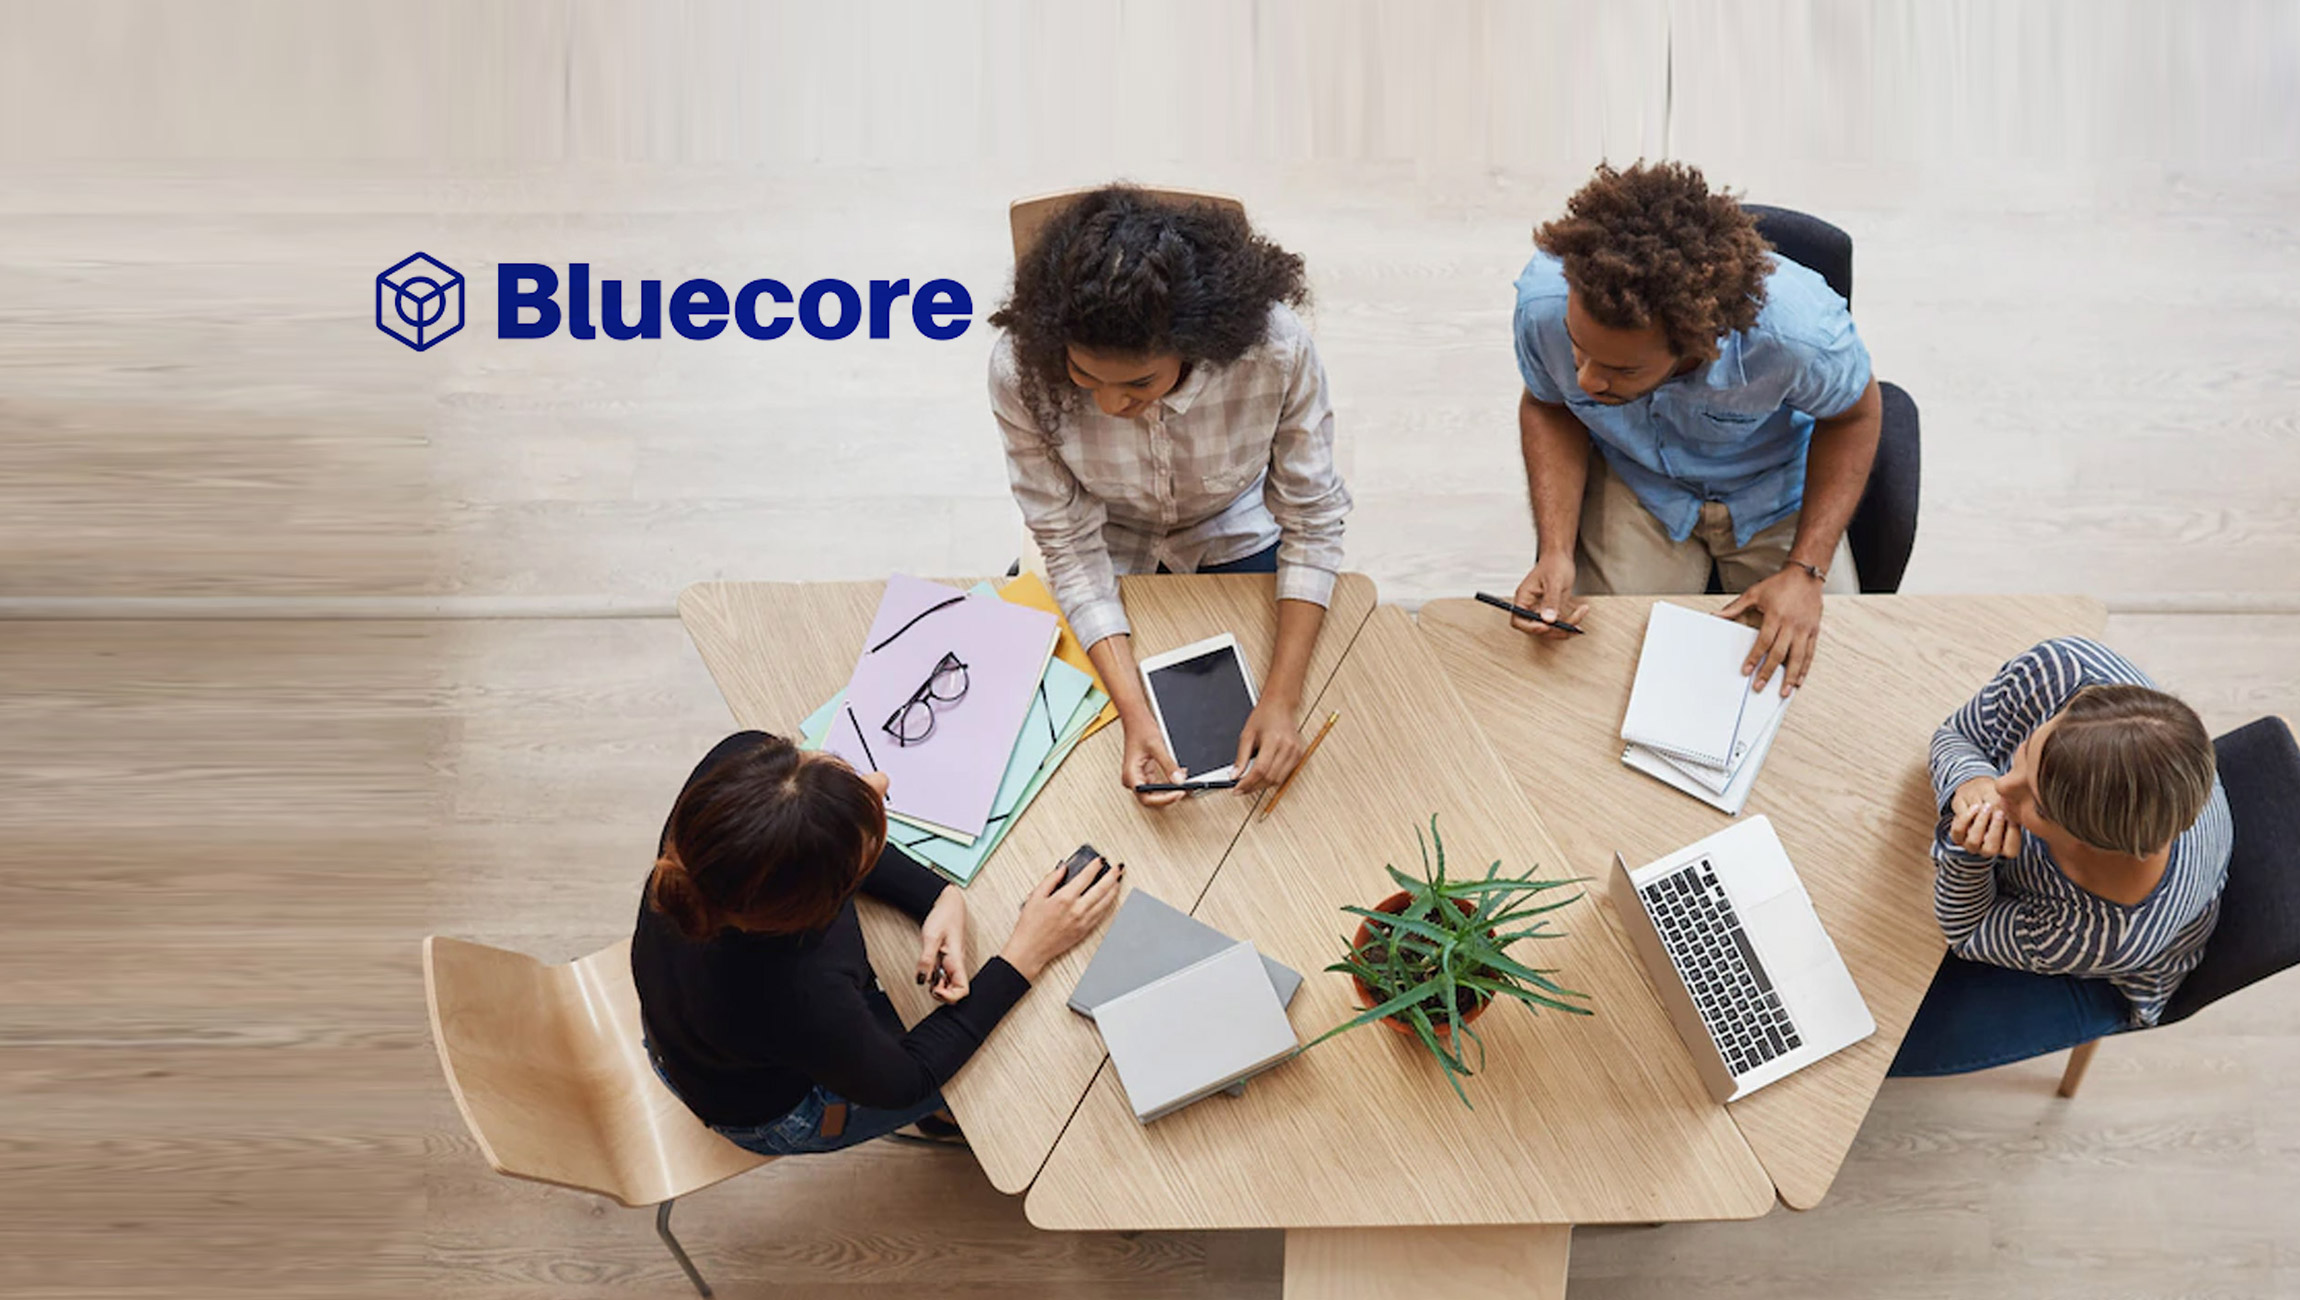 Lulu and Georgia Sees 229% Increase in Repeat Customers With Bluecore; Leverages Retail Technology to Grow Despite Economic Pressures